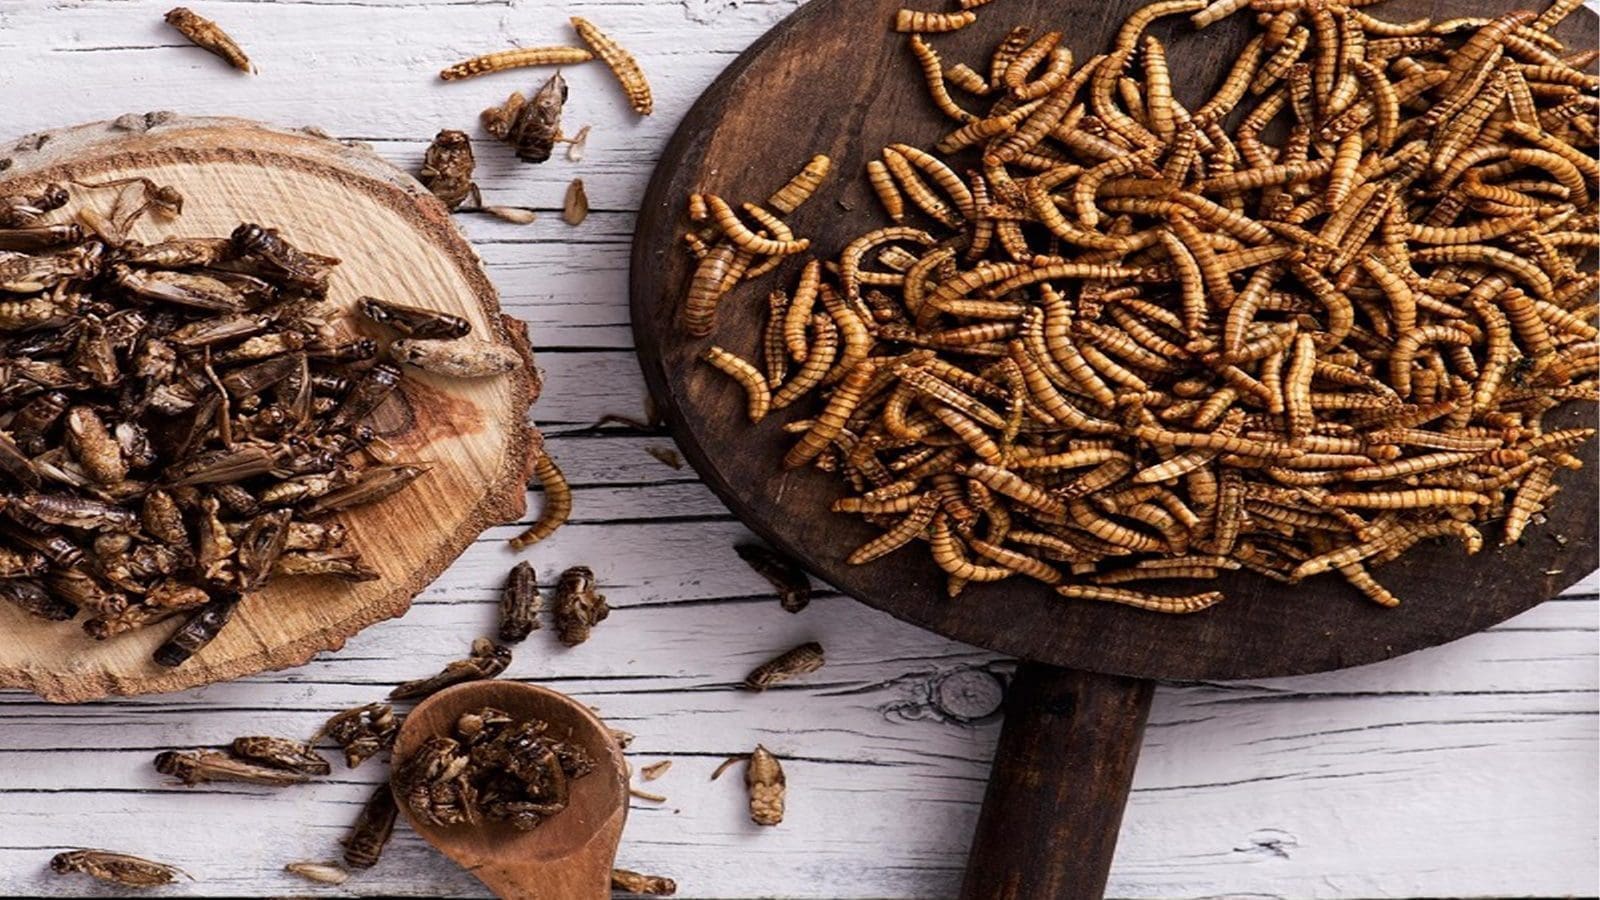 EU grants Novel Food authorizations to house cricket, yellow mealworms